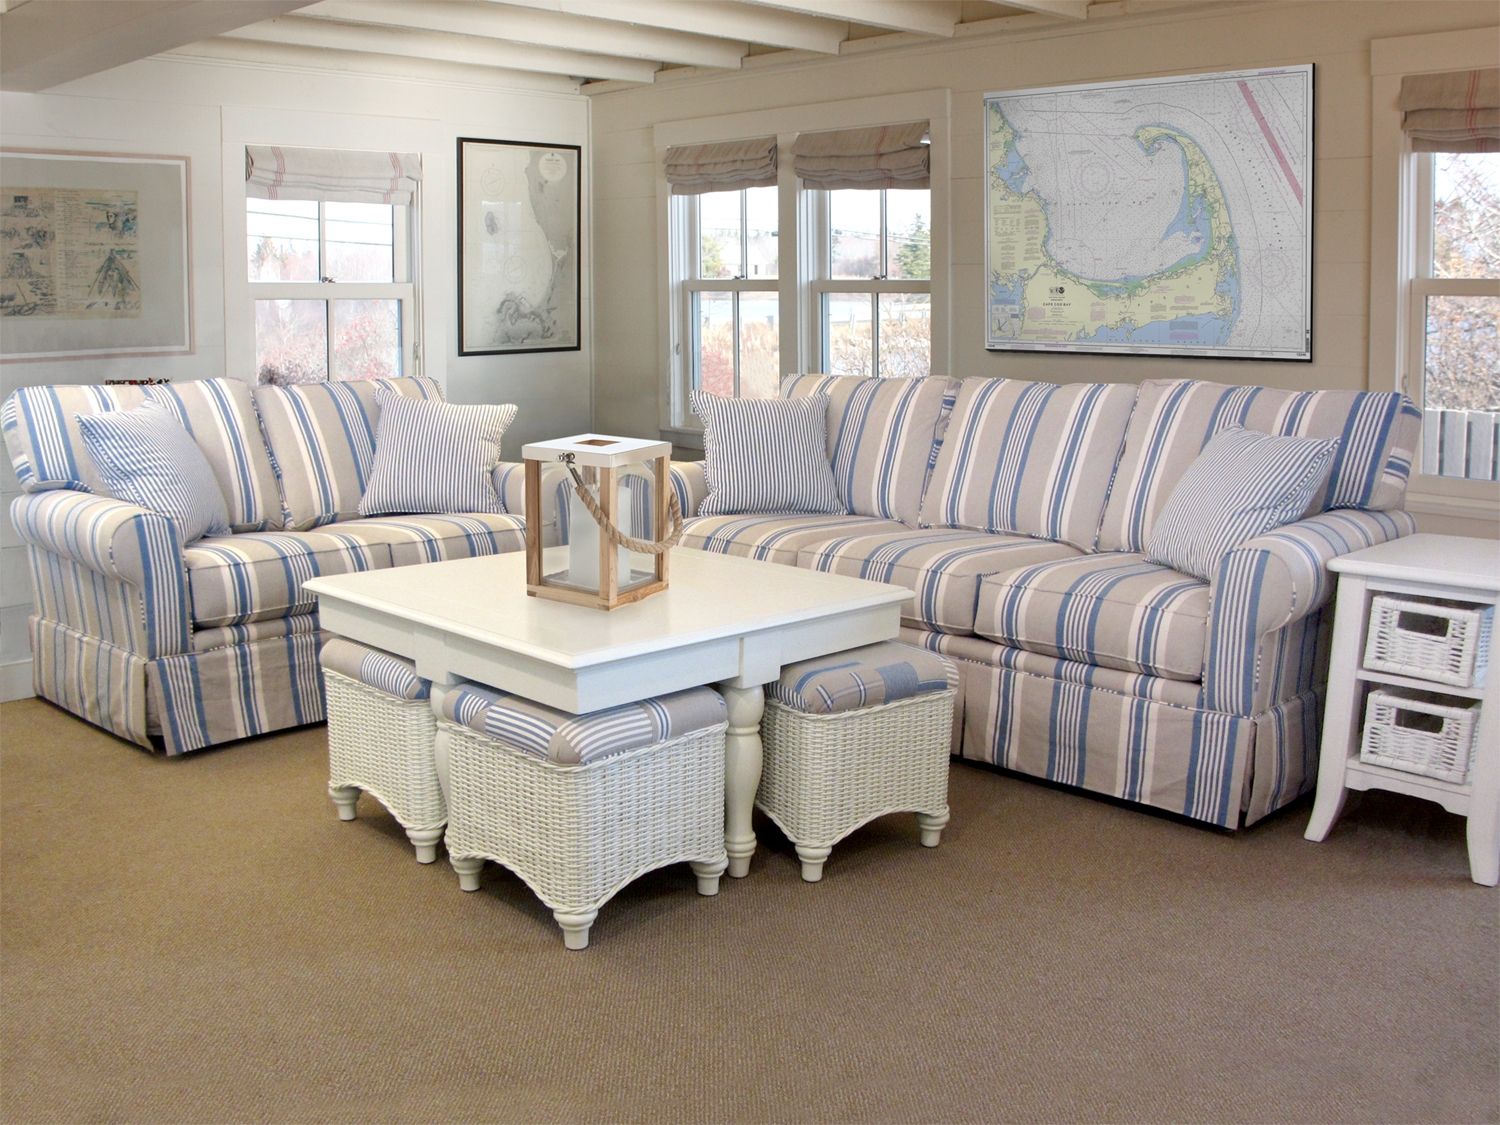 Awning Stripe Sofa Barbos Furniture Throughout Striped Sofas And Chairs (View 10 of 15)